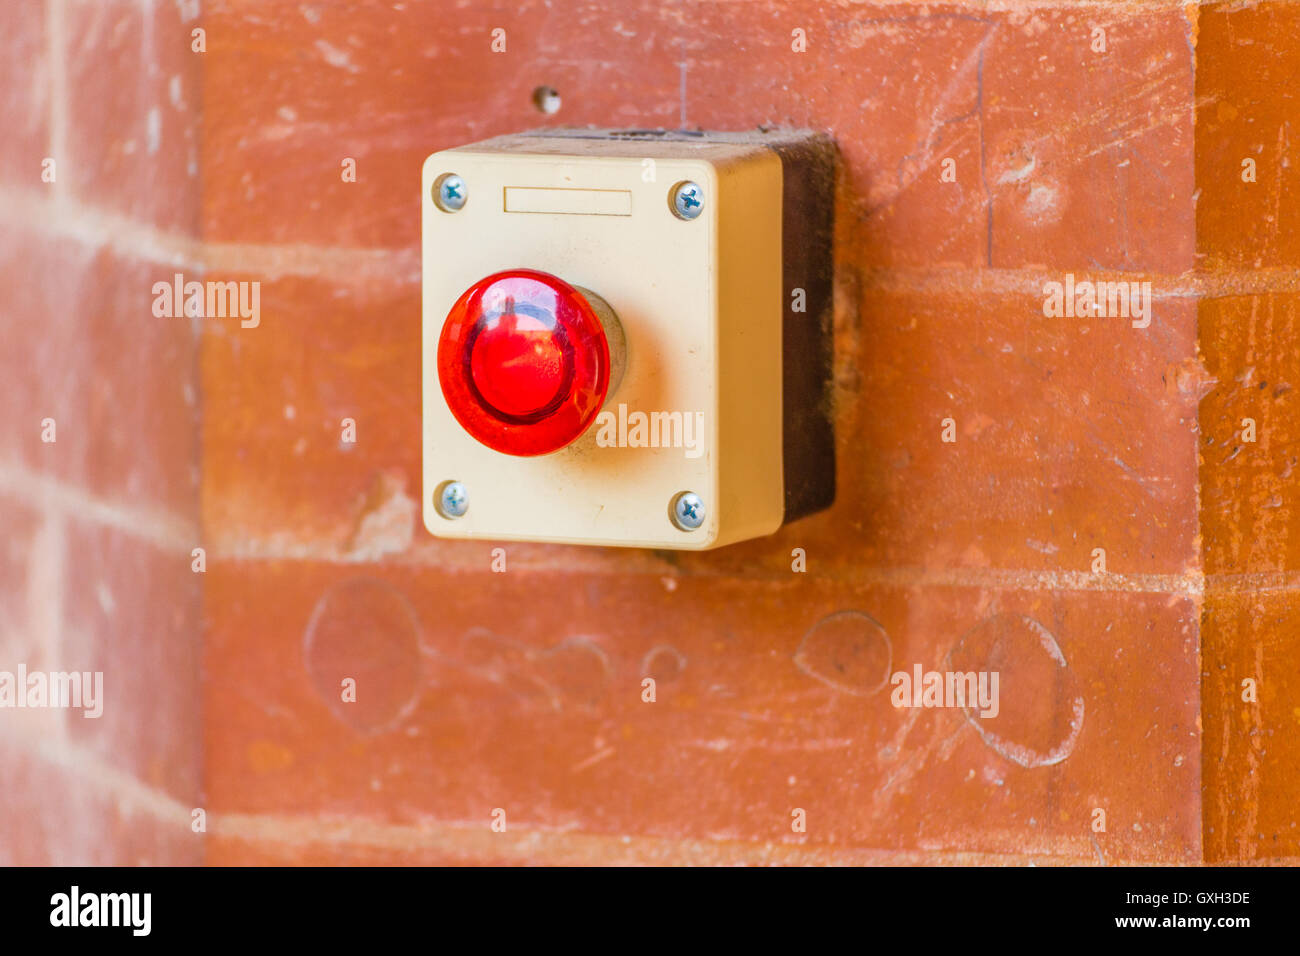 Emergency door release red button with light on Stock Photo